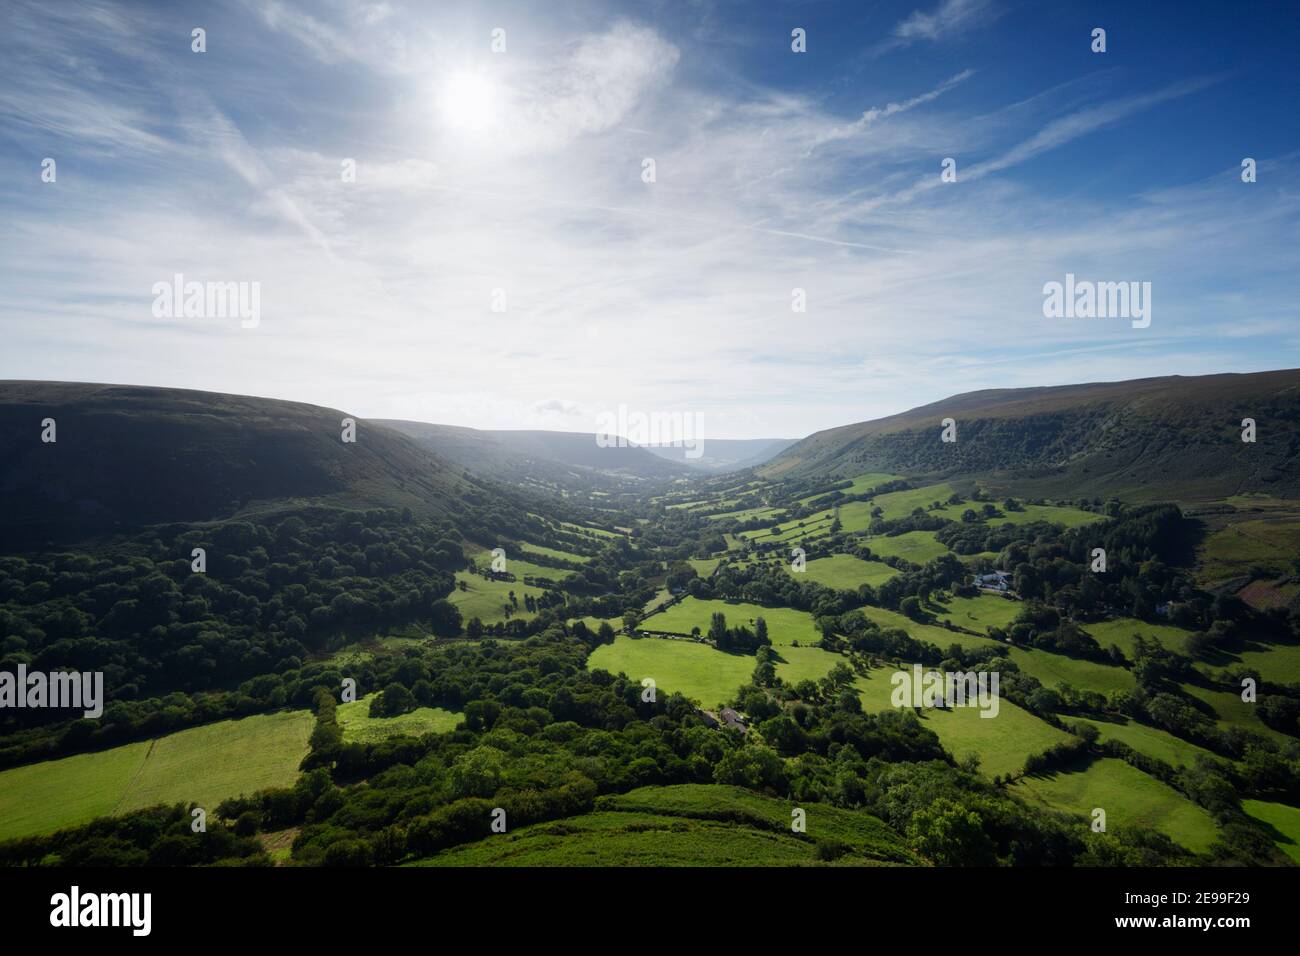 Vale of Ewyas in The Black Mountains. Brecon Beacons National Park. Wales. UK. Stock Photo